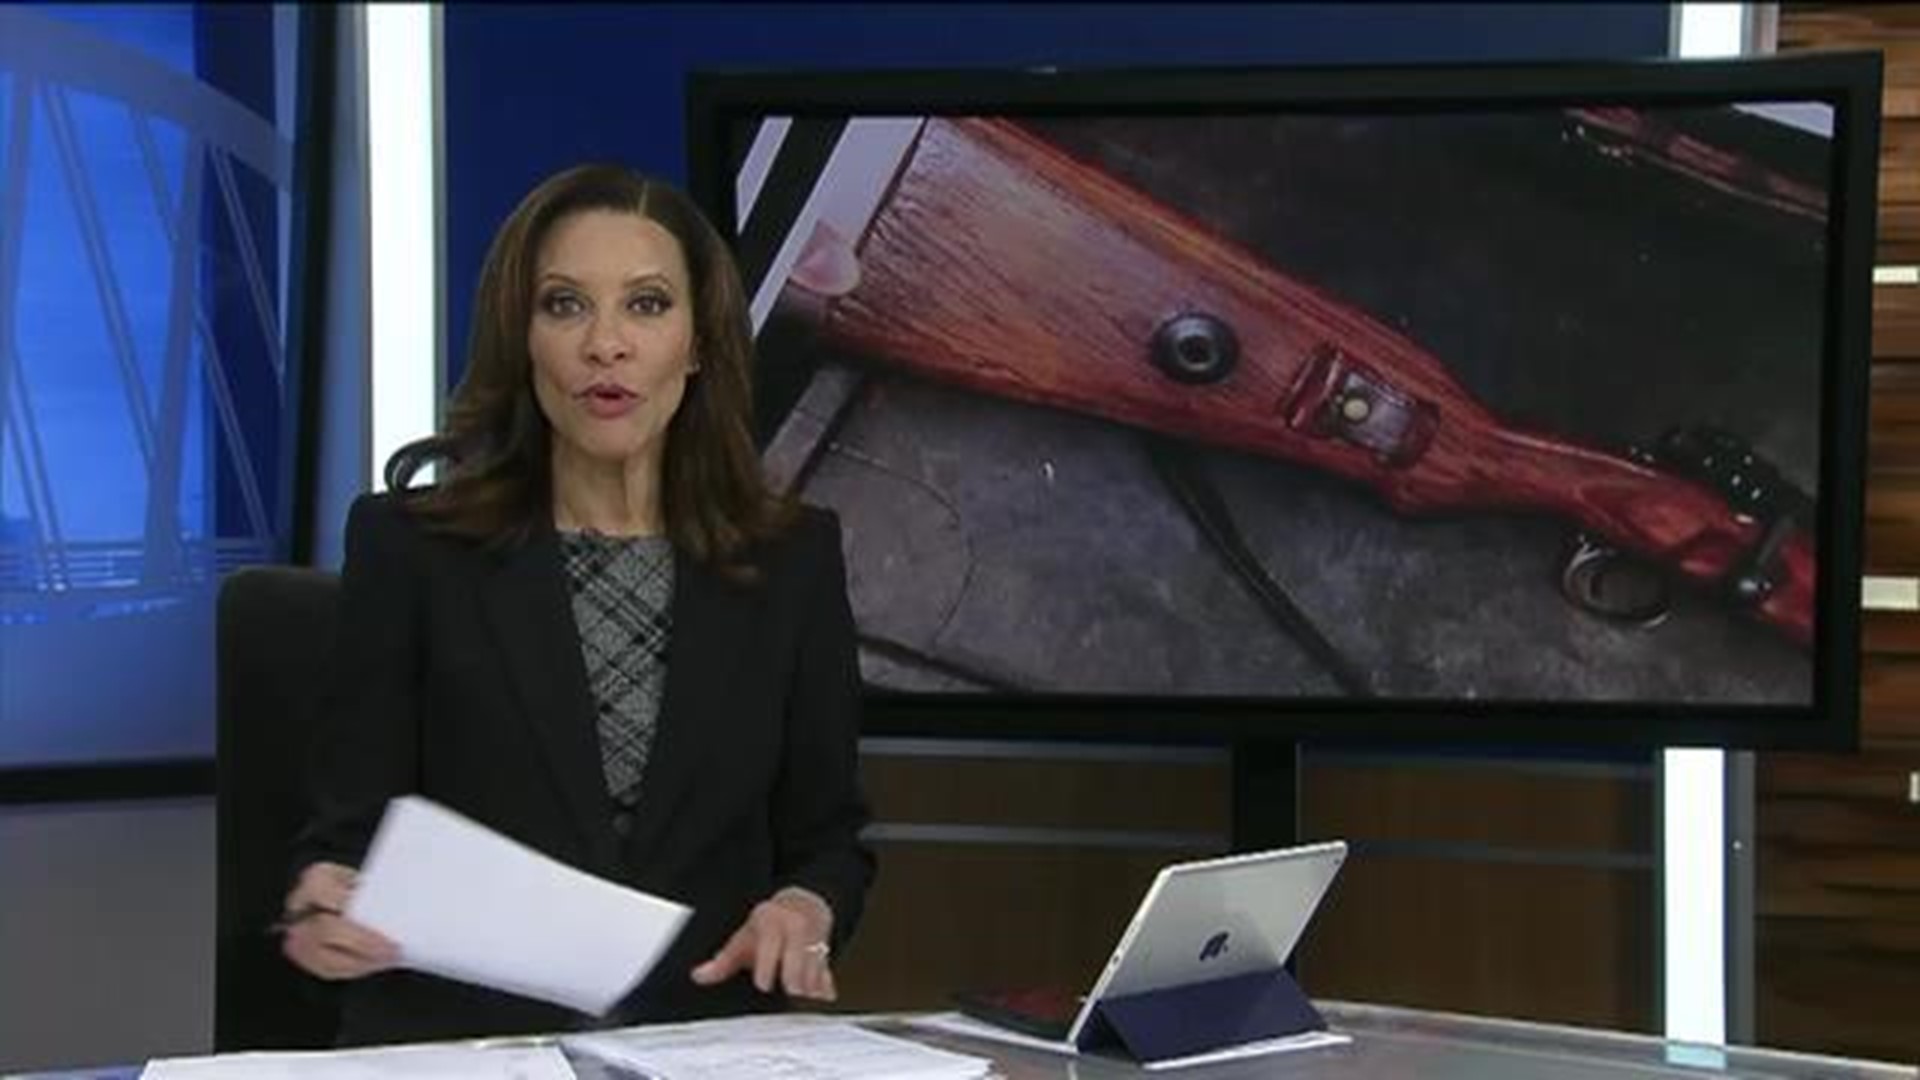 The story of a WWII rifle found in Circleville